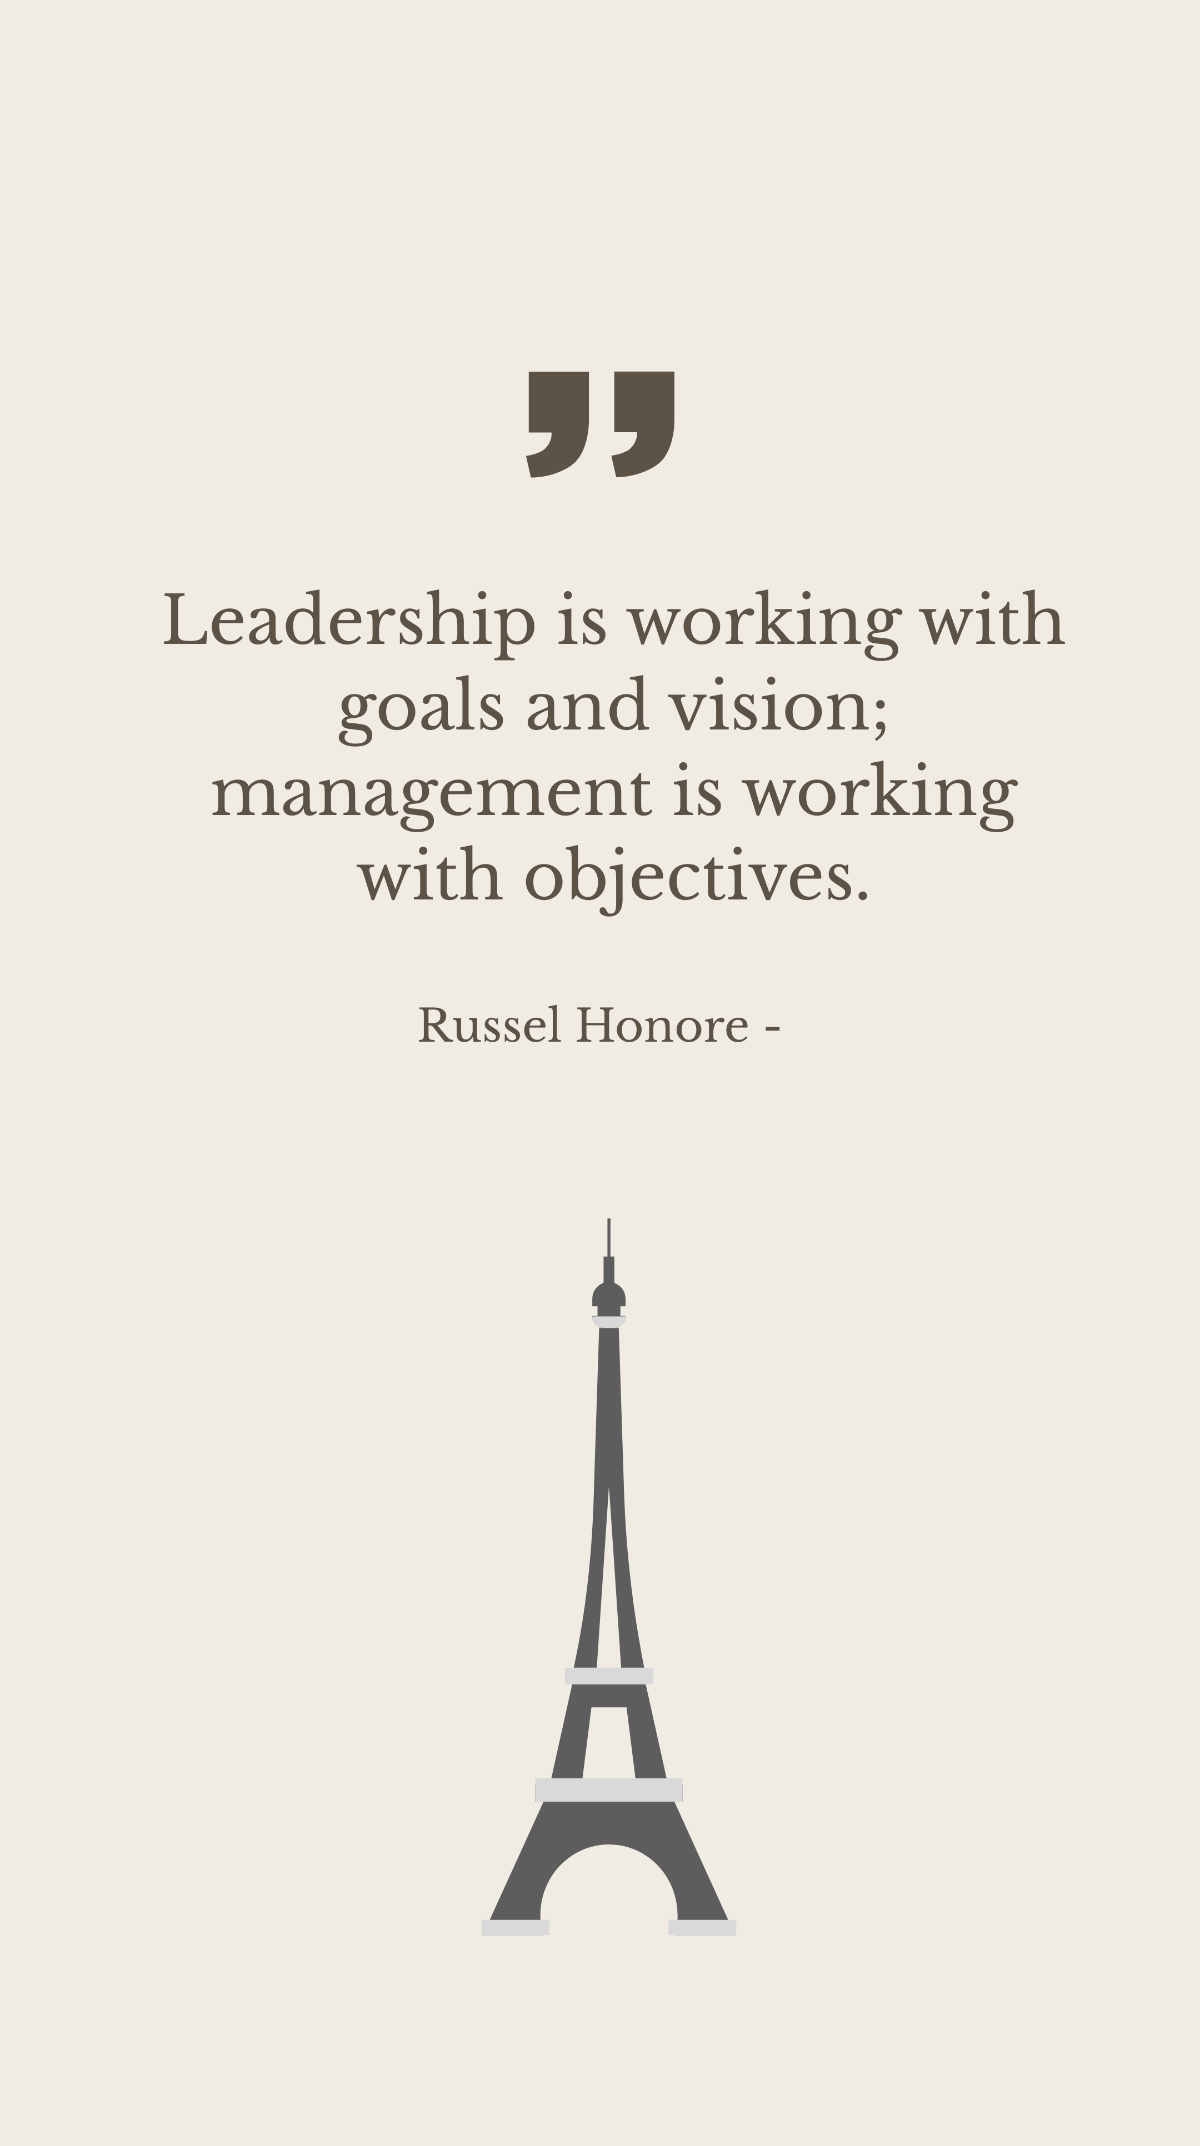 Russel Honore - Leadership is working with goals and vision; management is working with objectives. Template